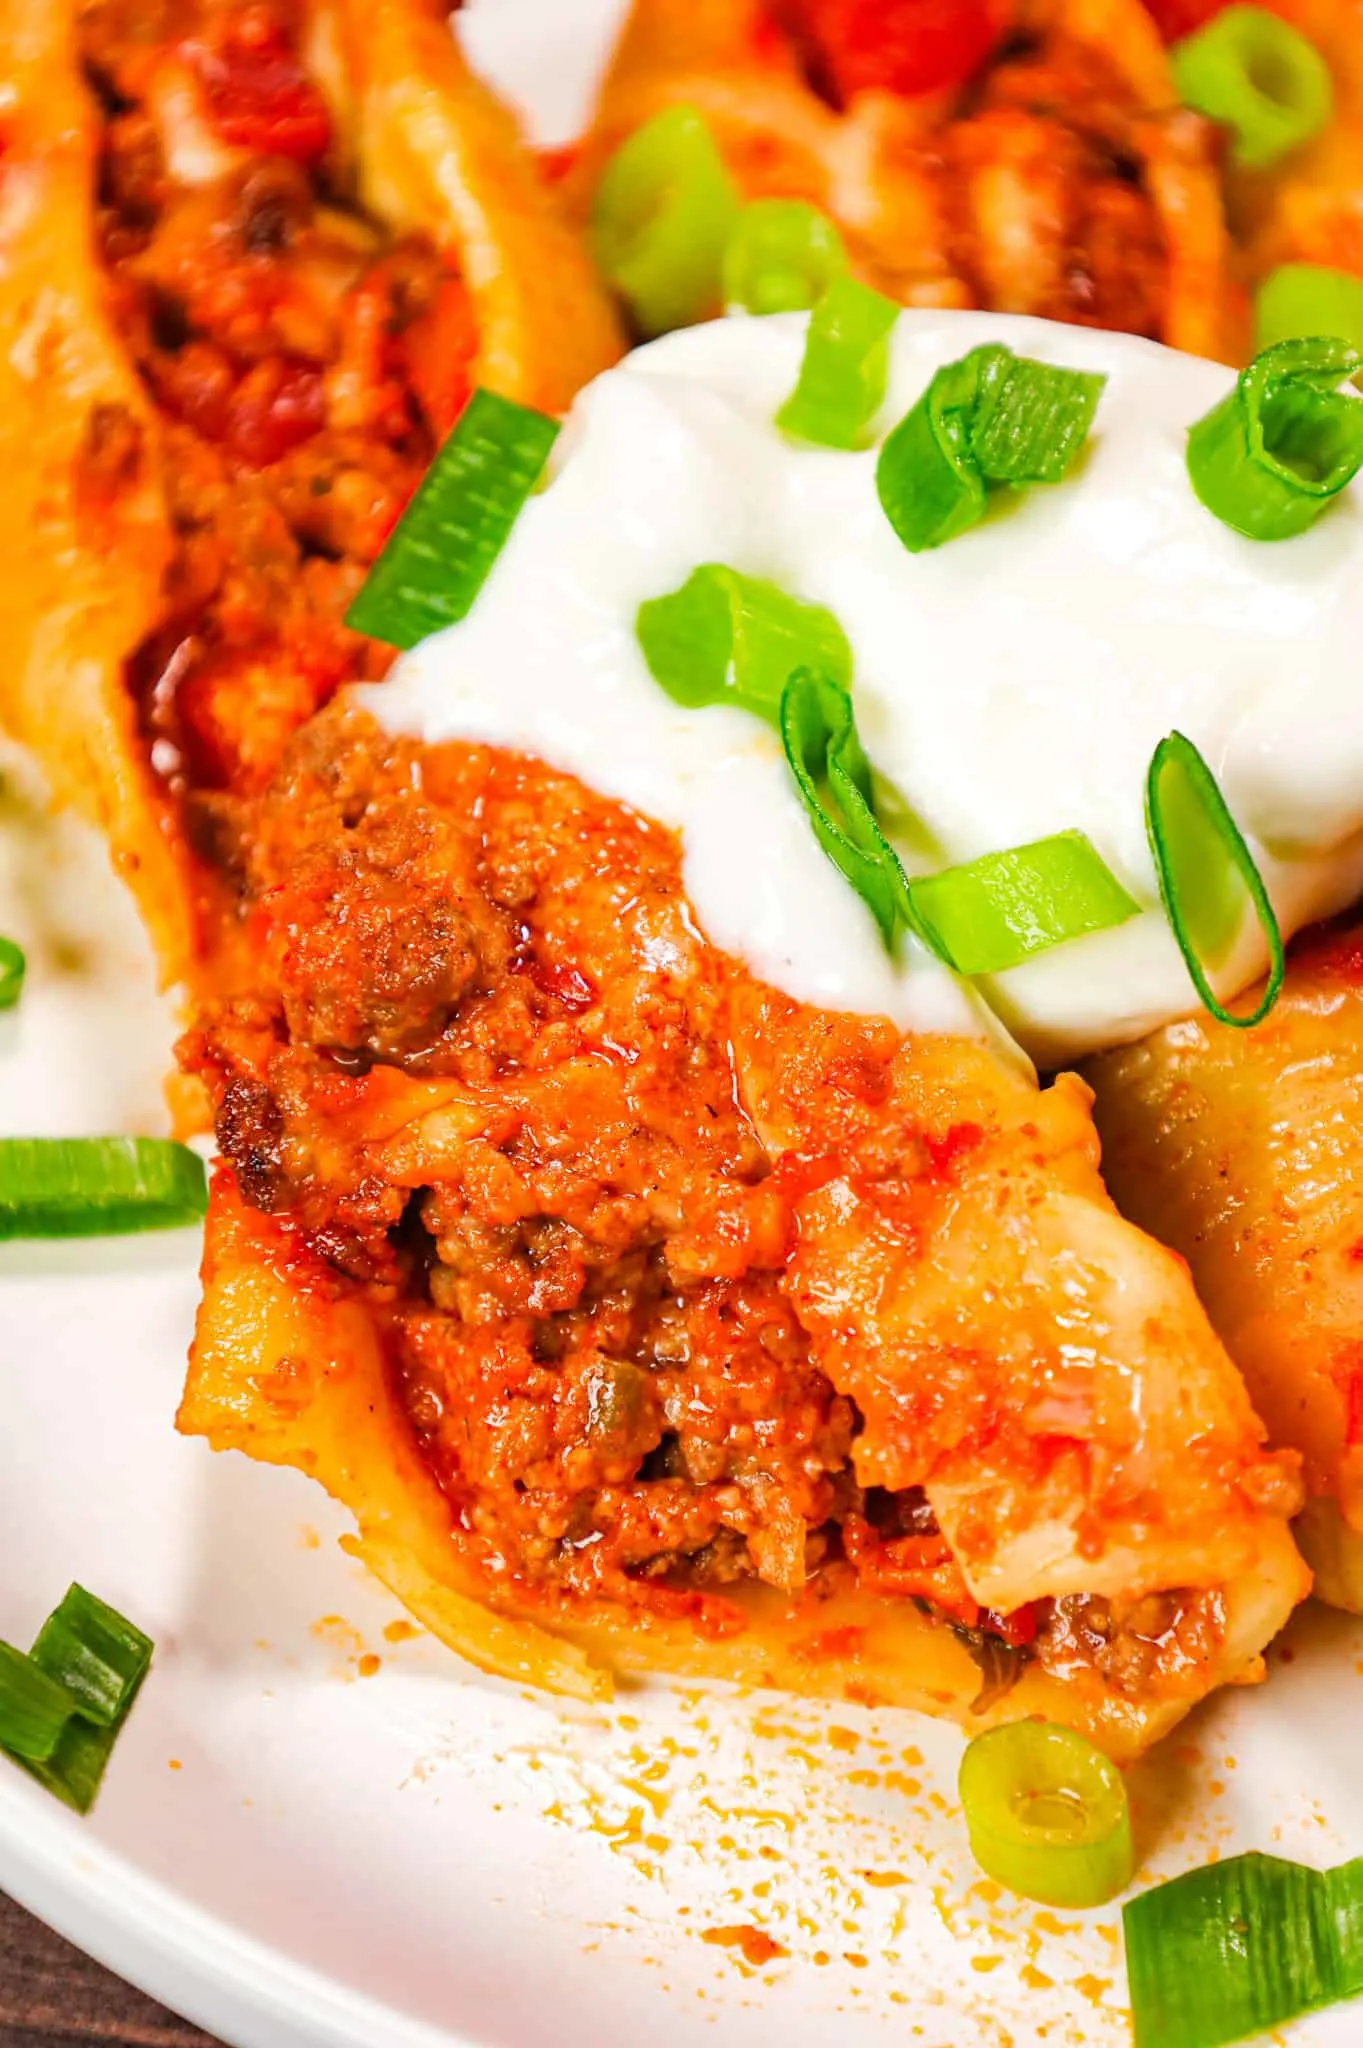 Taco Stuffed Shells are cheesy ground beef stuffed pasta shells loaded with salsa and Rotel diced tomatoes and green chilies.